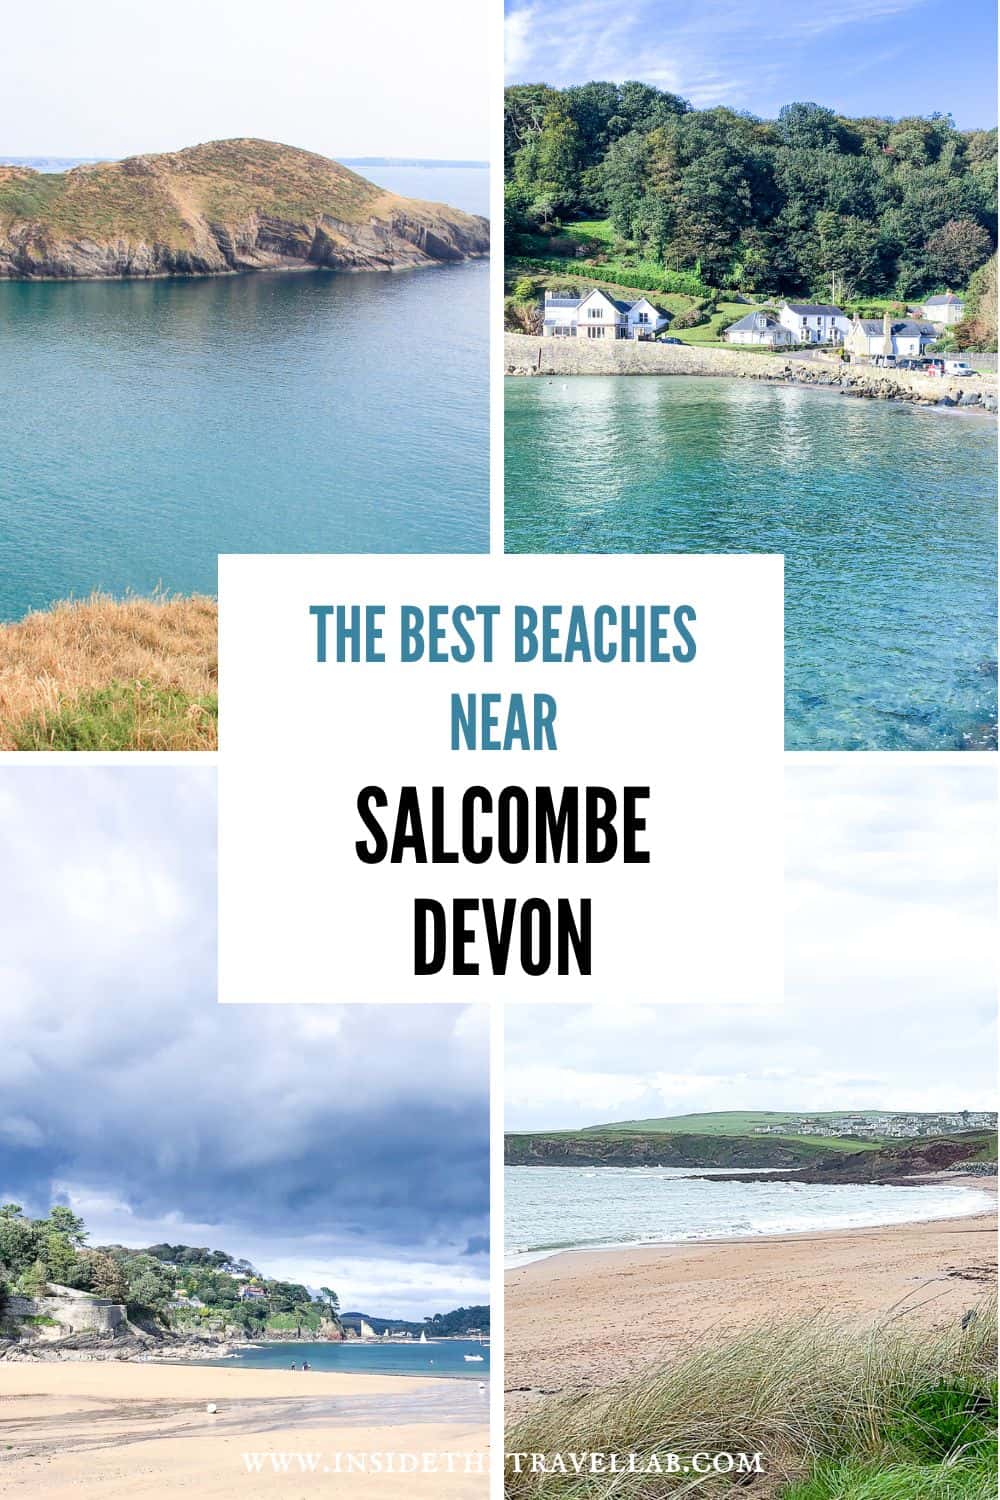 Best beaches near Salcombe cover image showing four beaches near the English town